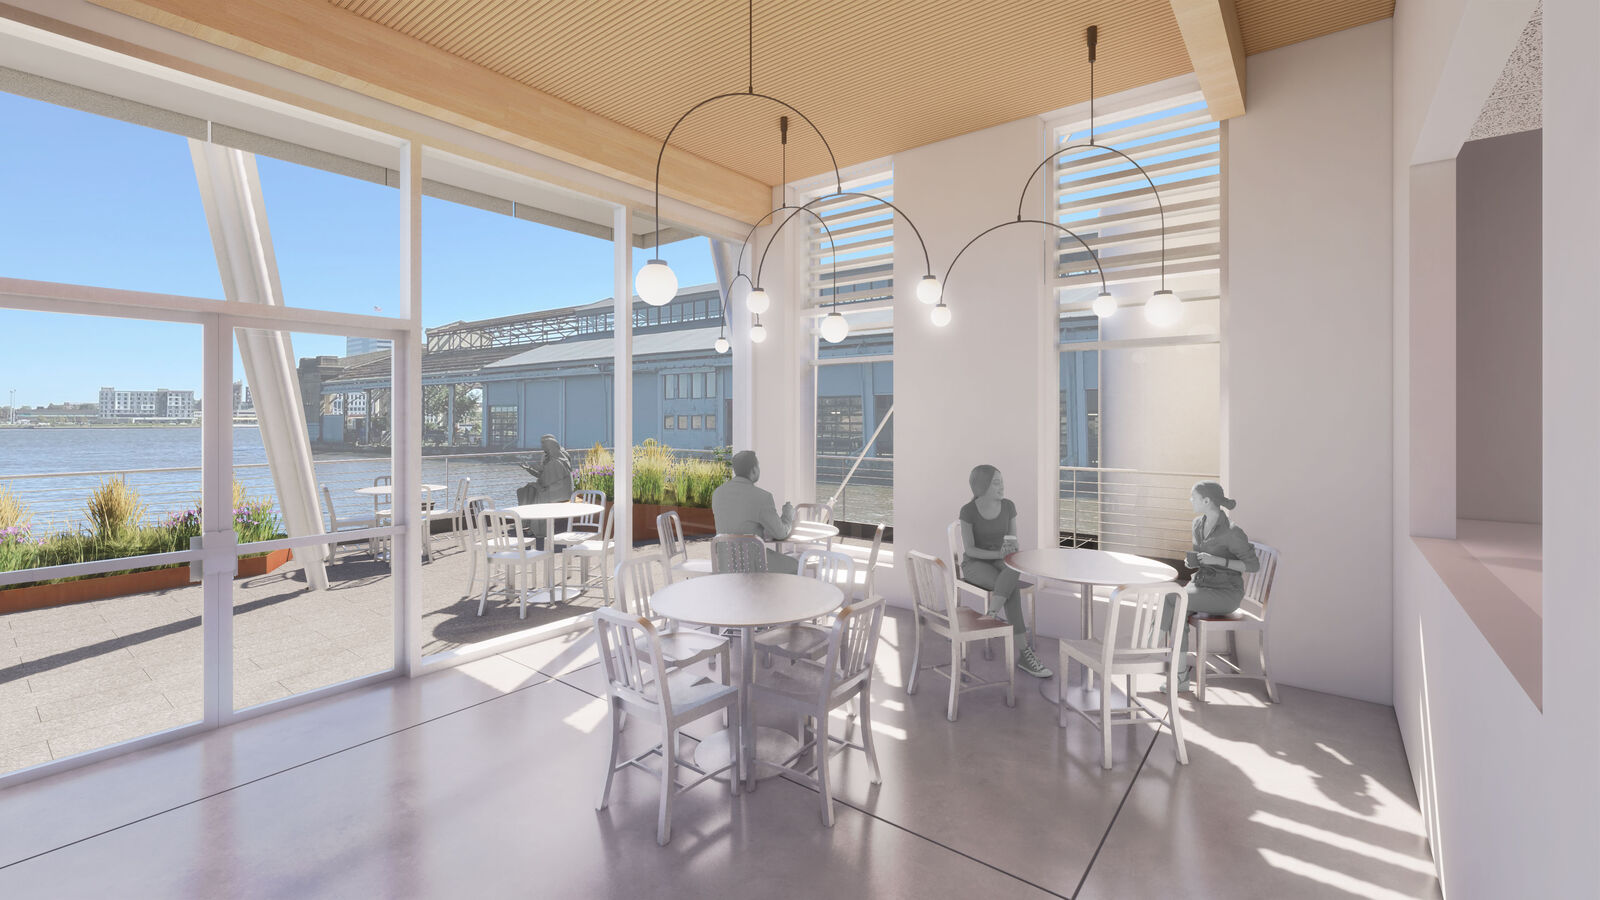 interior rendering of the cafe in the floating gallery